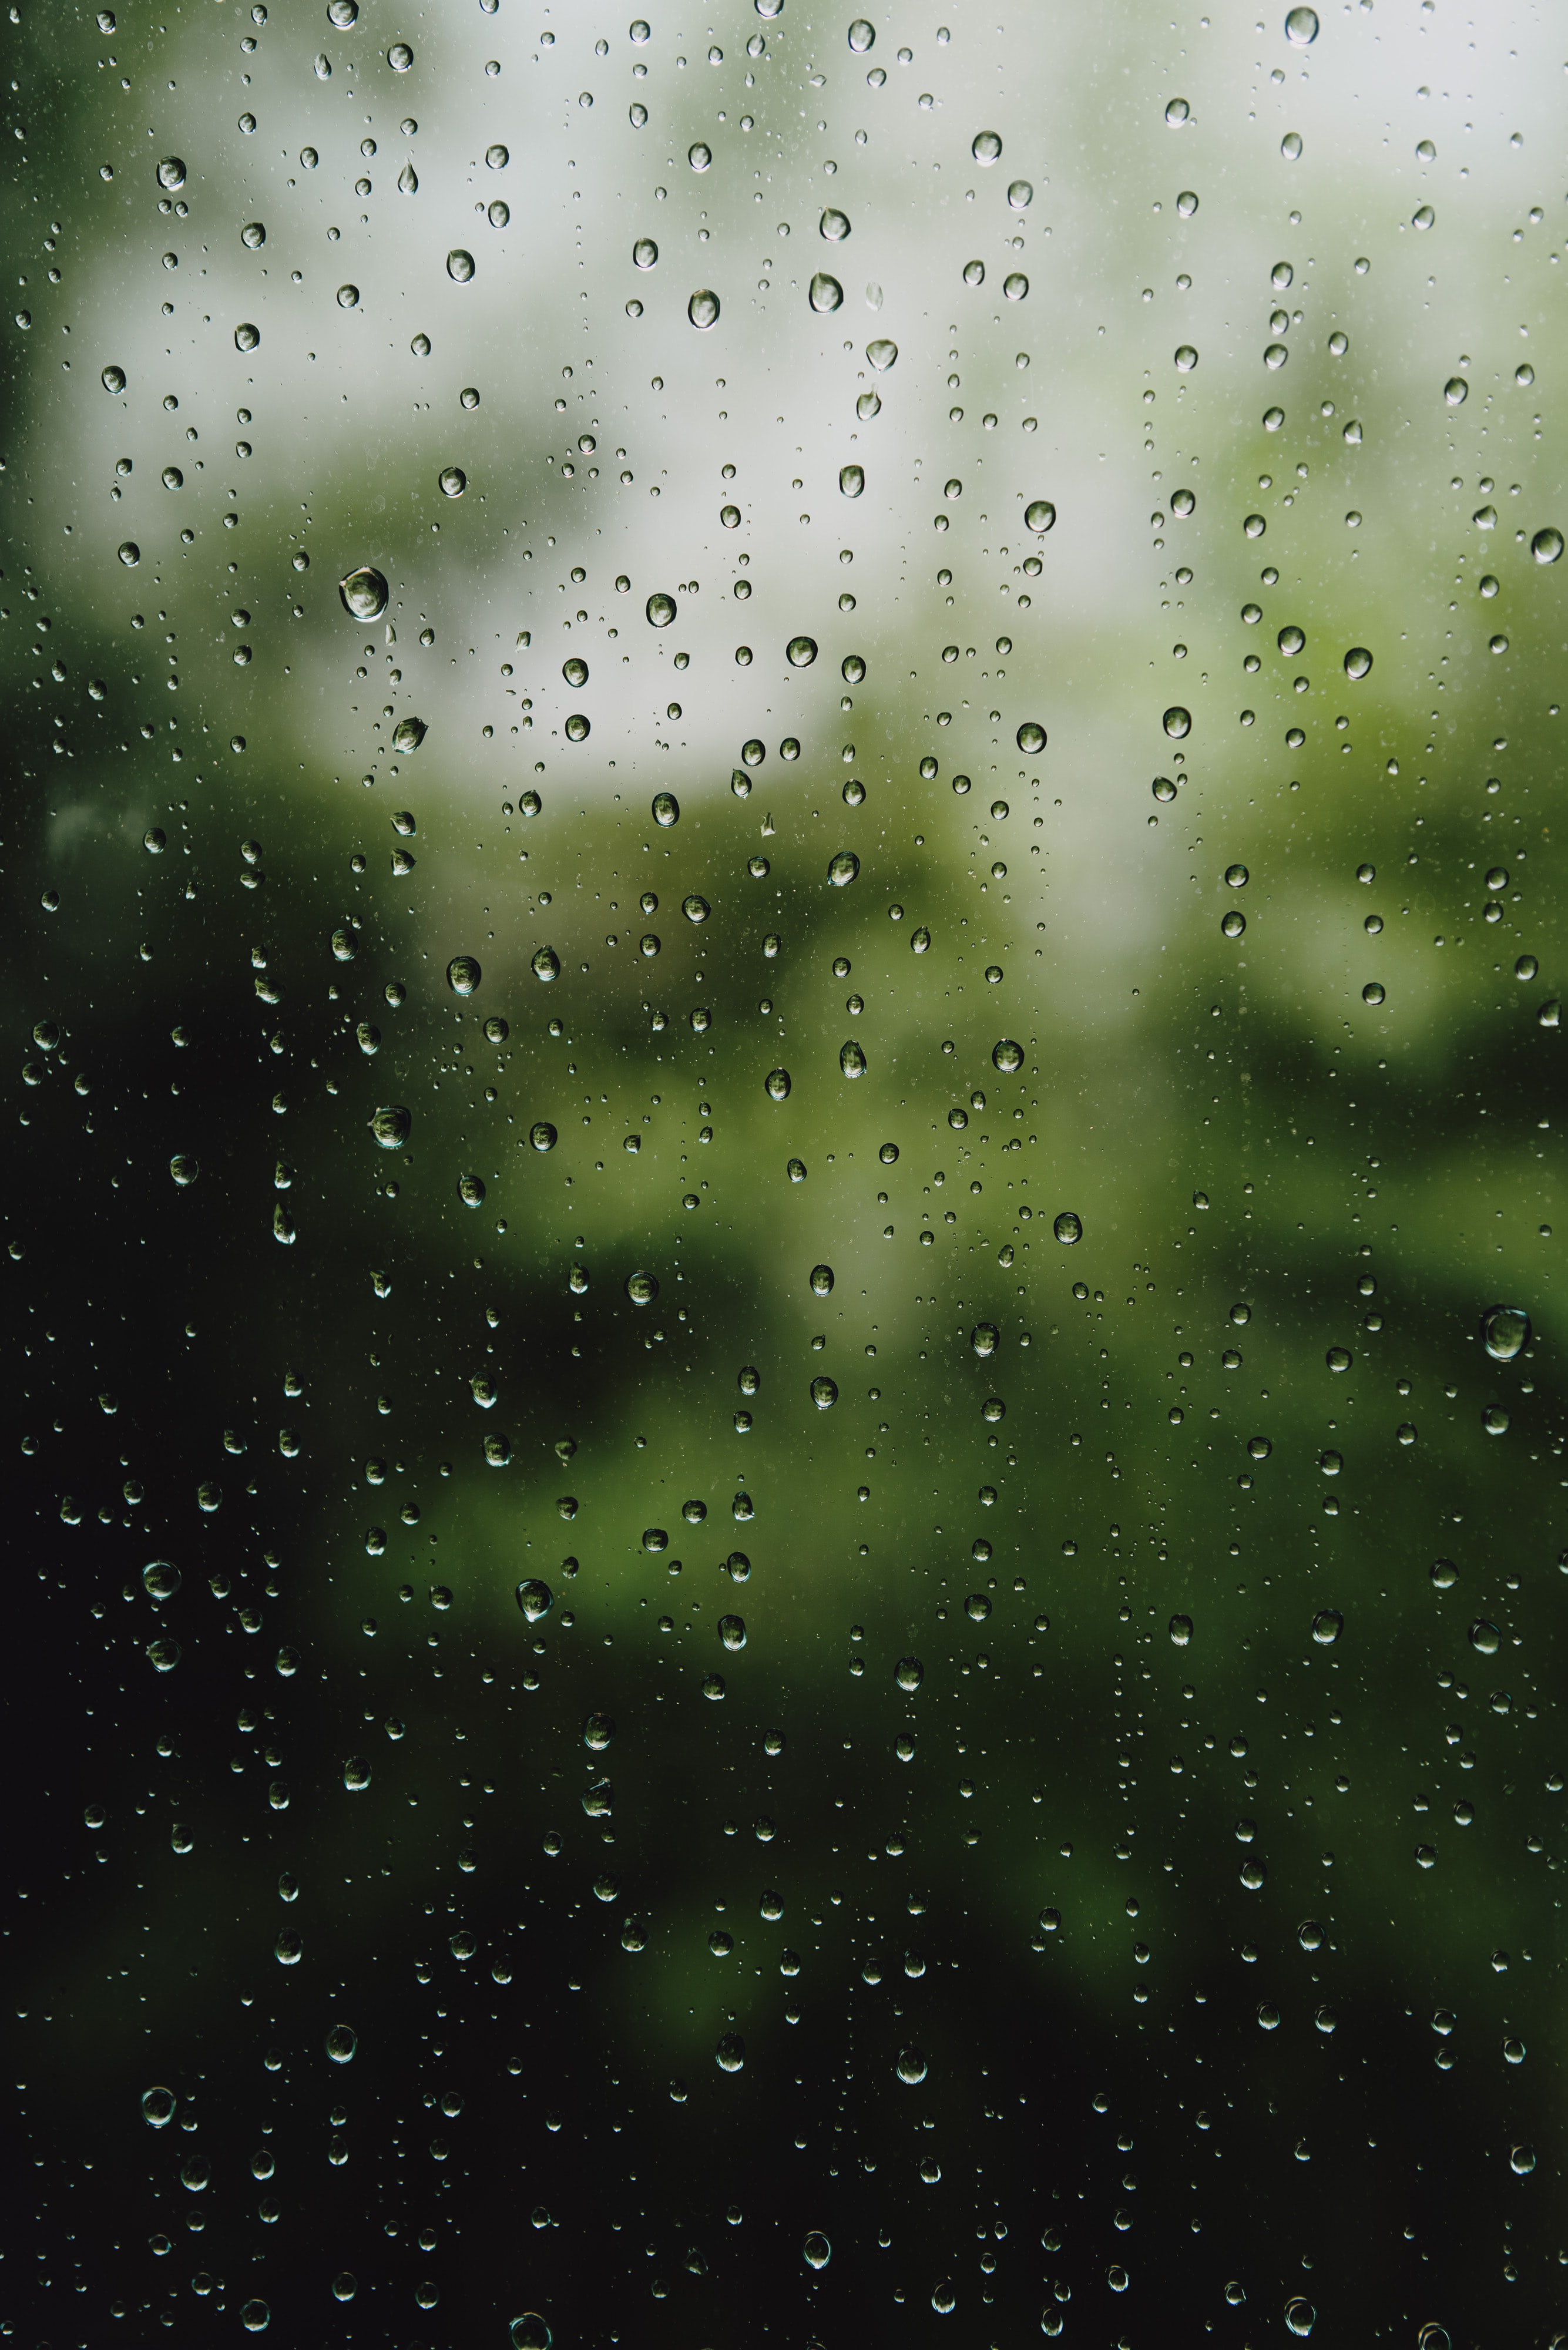 rainy day wallpapers download